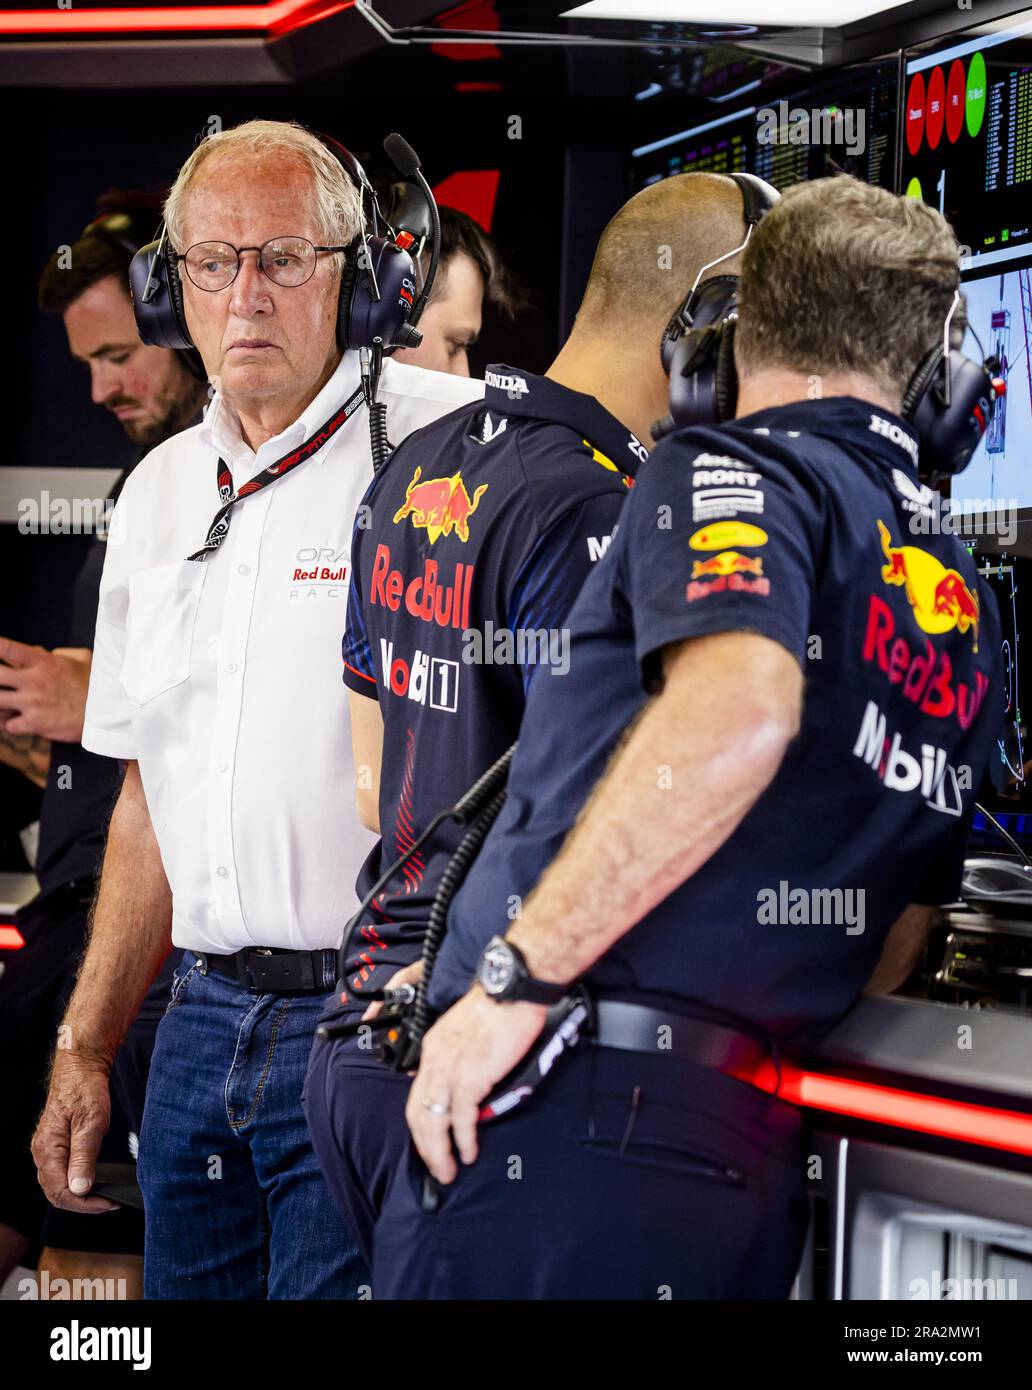 SPIELBERG - Helmut Marko (Red Bull Racing) during the first free practice session ahead of the Austrian Grand Prix at the Red Bull Ring on June 30, 2023 in Spielberg, Austria. ANP SEM VAN DER WAL Credit: ANP/Alamy Live News Stock Photo